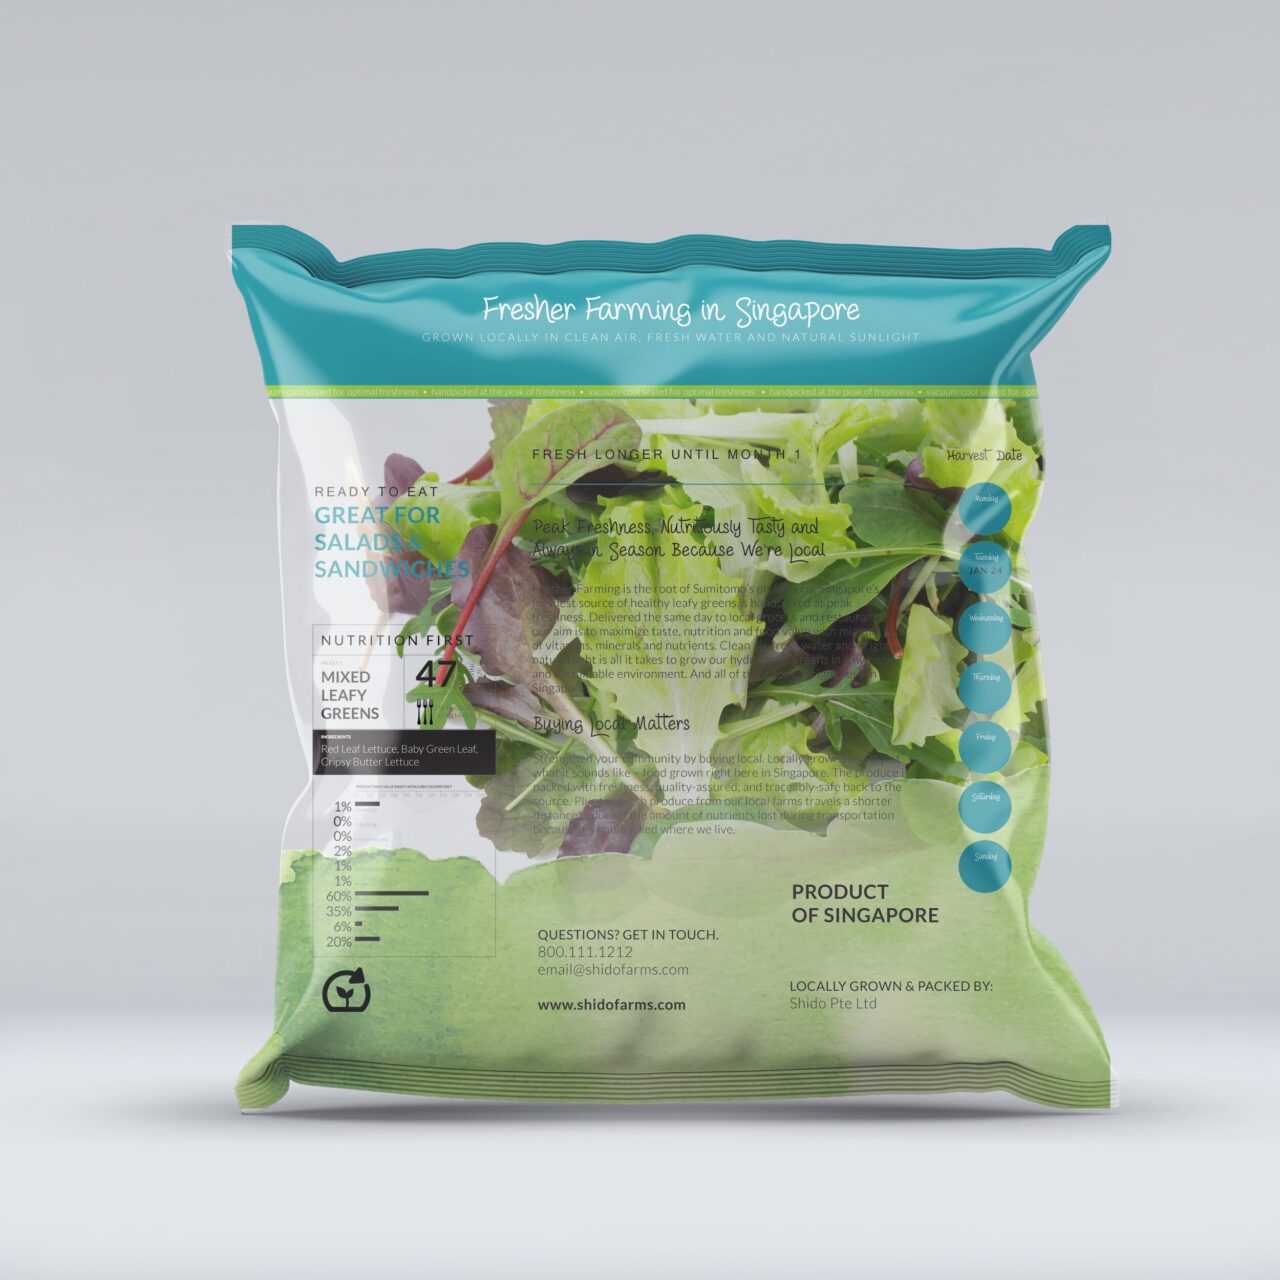 GEE for Sumitomo Chemical Asia salad mix packaging design